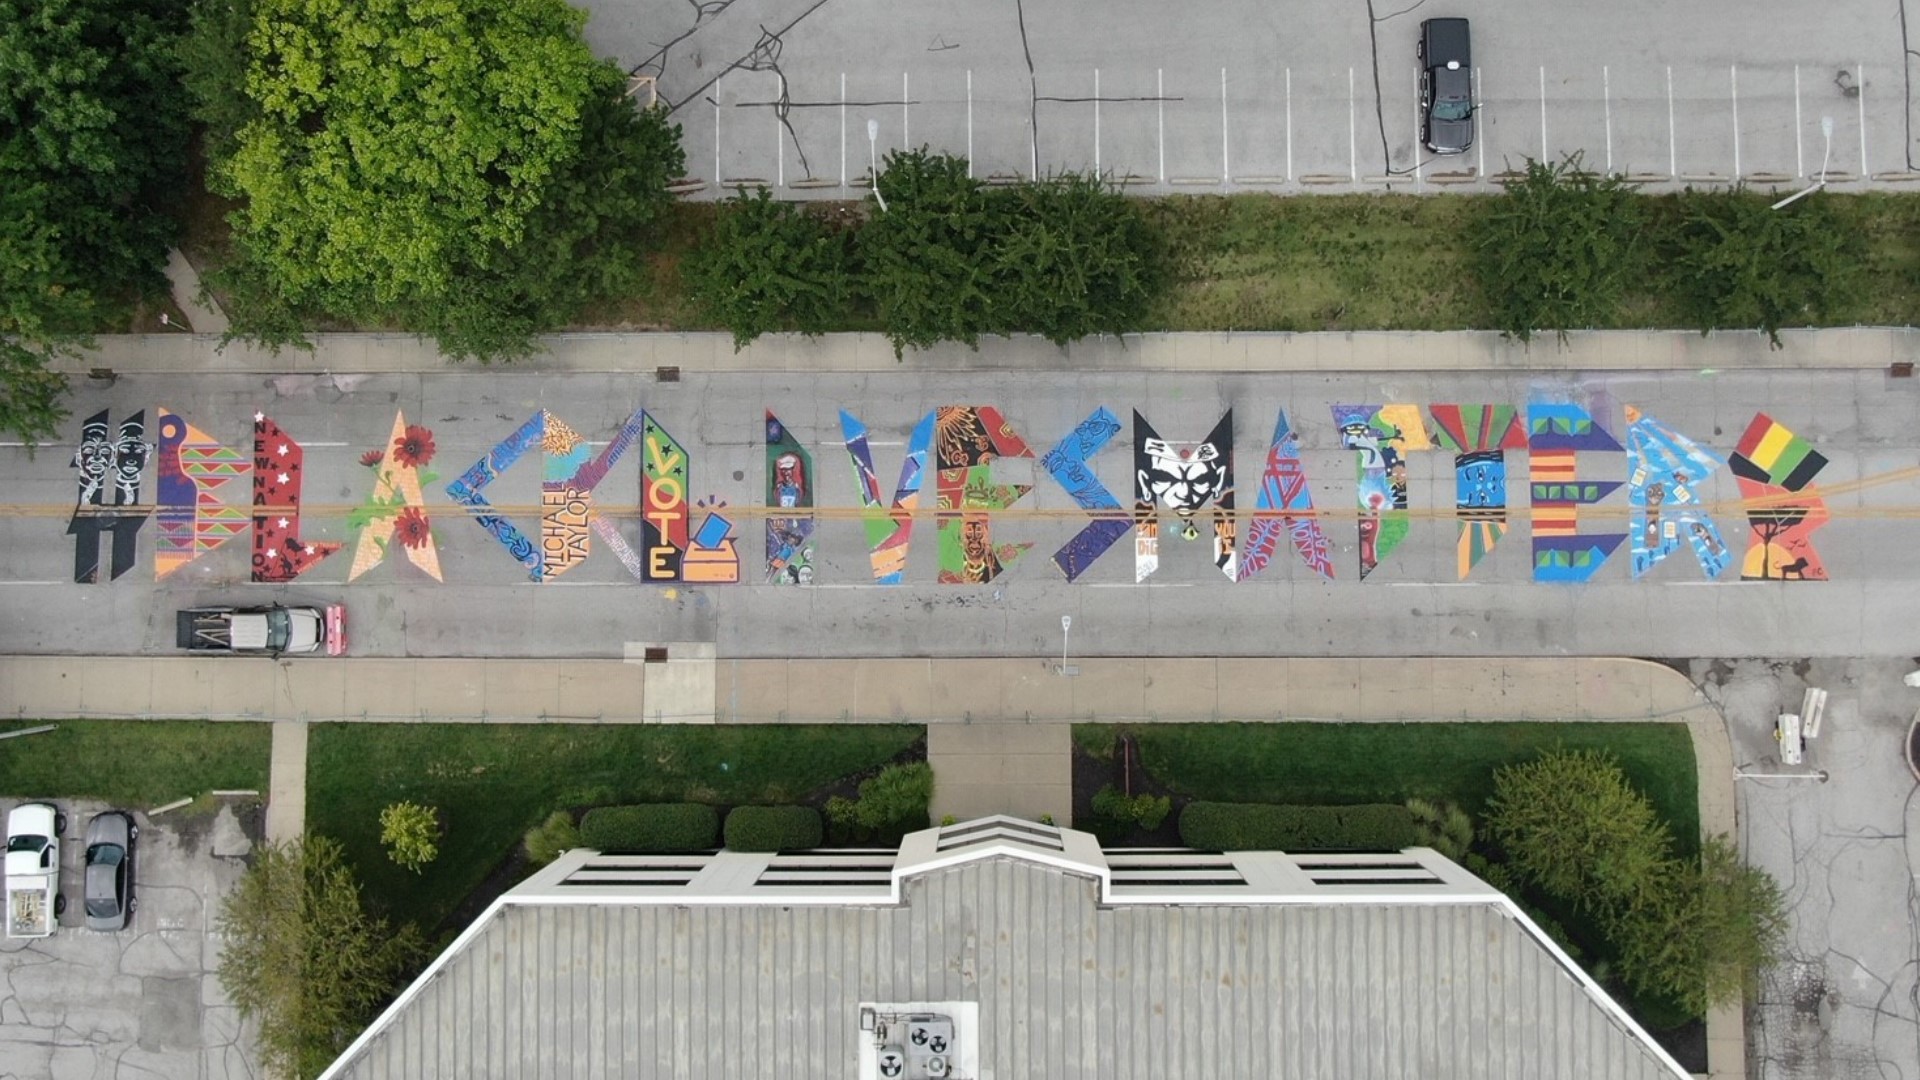 The extended closure through Thursday, Aug. 6 is meant to allow time for the mural to dry.